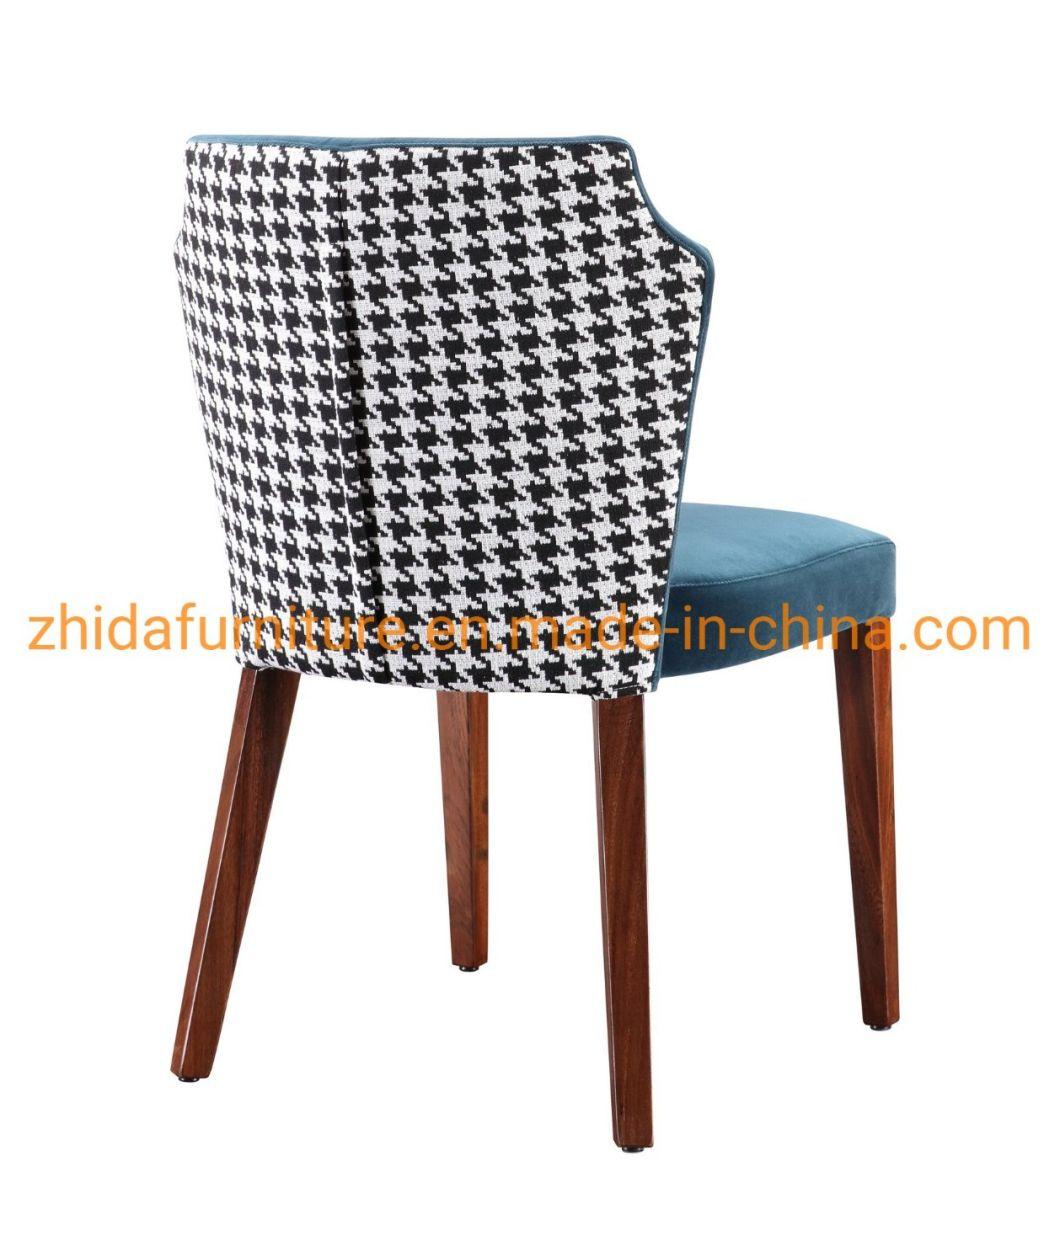 Chinese Living Room Home Furniture Upholstery Top Modern Dining Chair